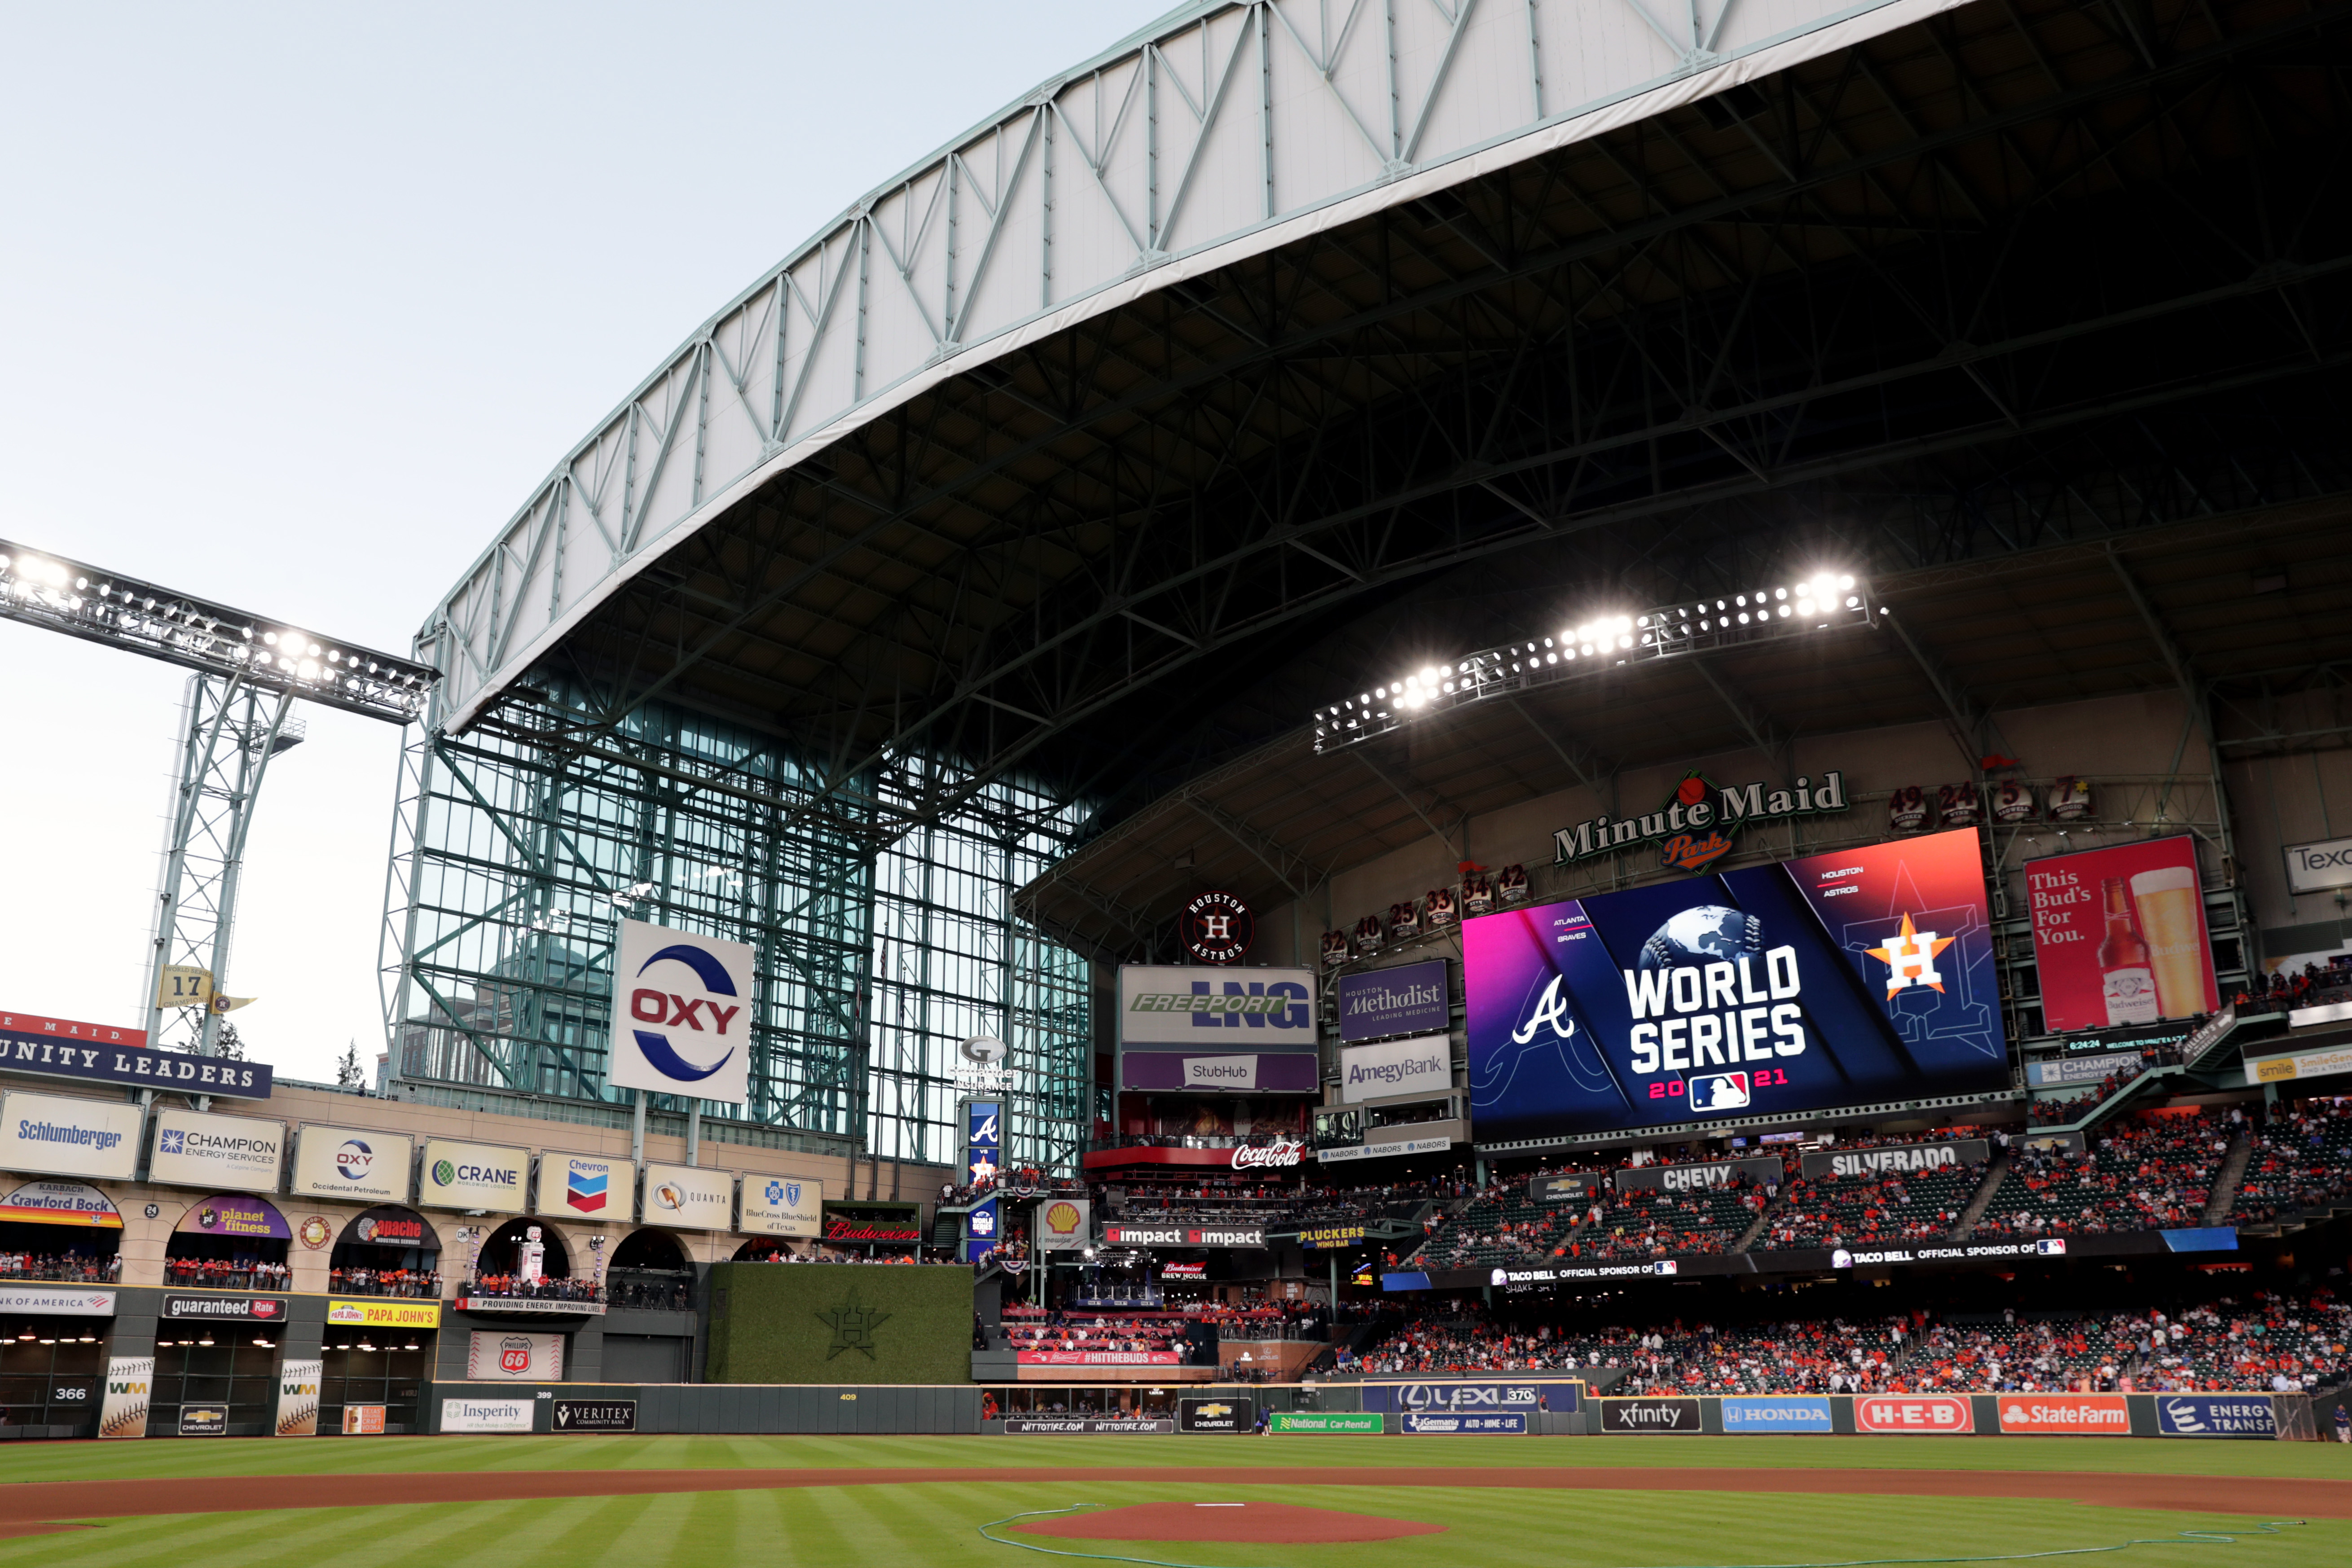 A general view of Minute Maid Park with the roof open prior to Game 2 of the 2021 World Series between the Atlanta Braves and the Houston Astros on Wednesday, October 27, 2021 in Houston, Texas.